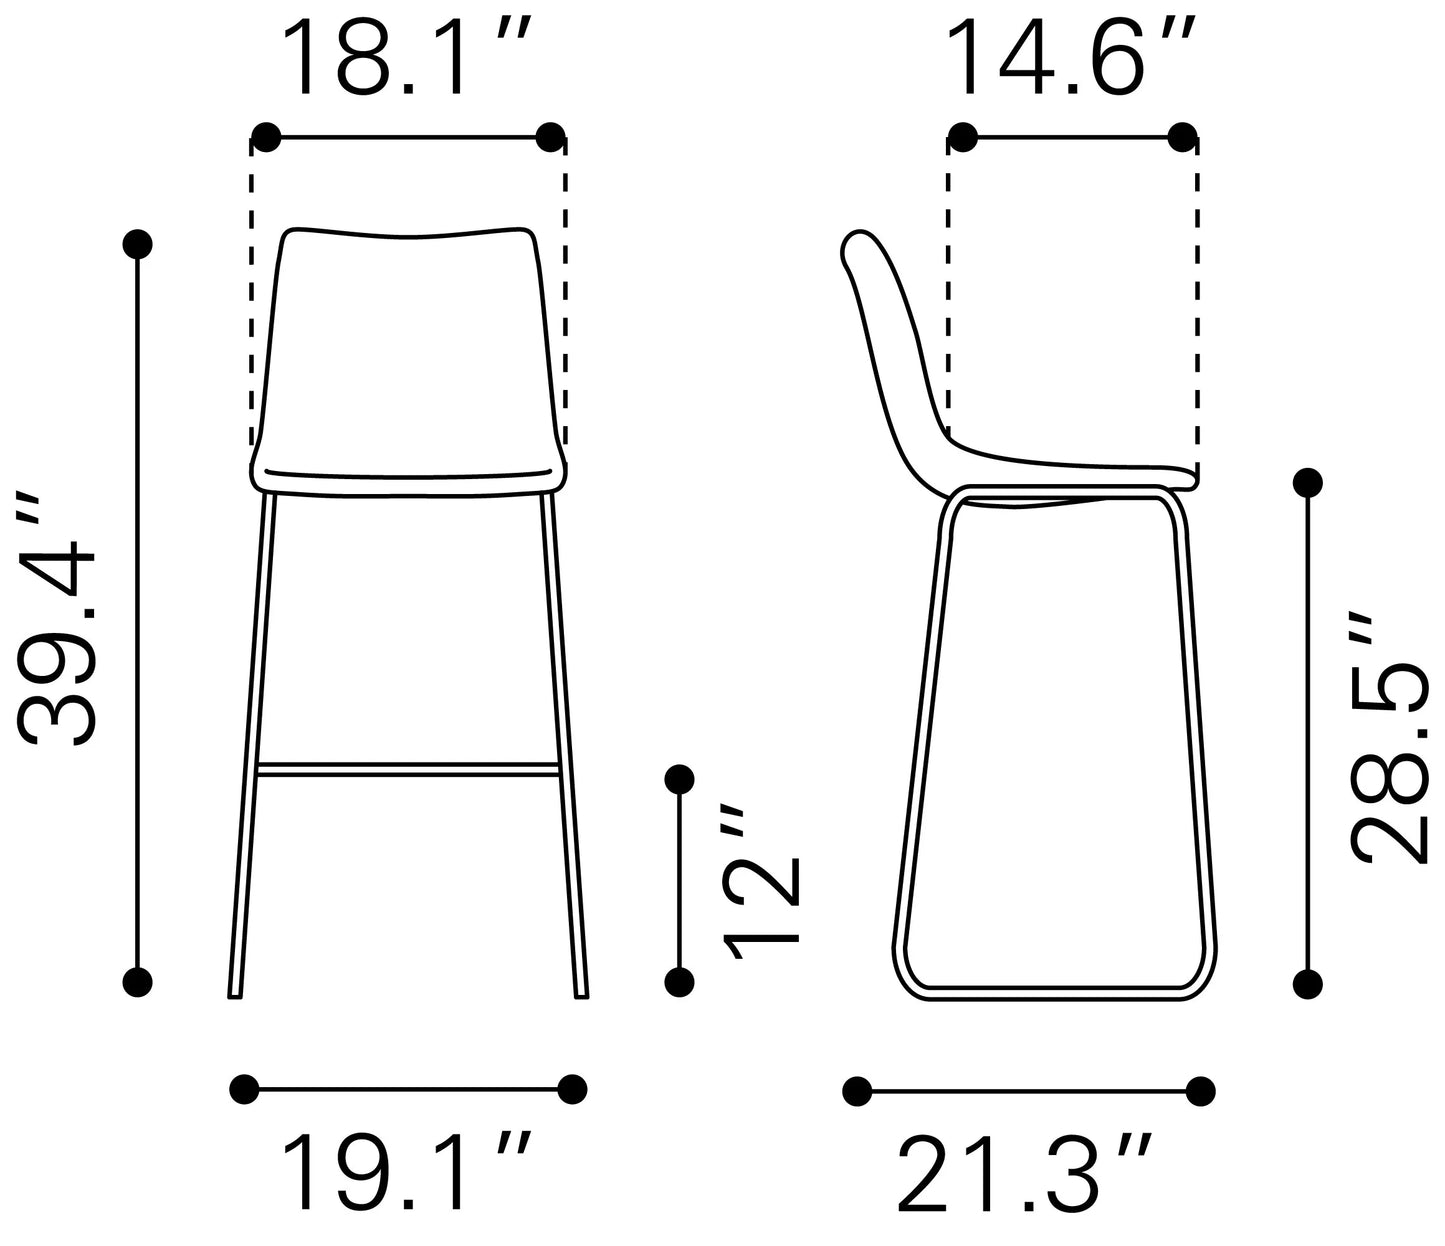 Dimensions of Smart Barstool 